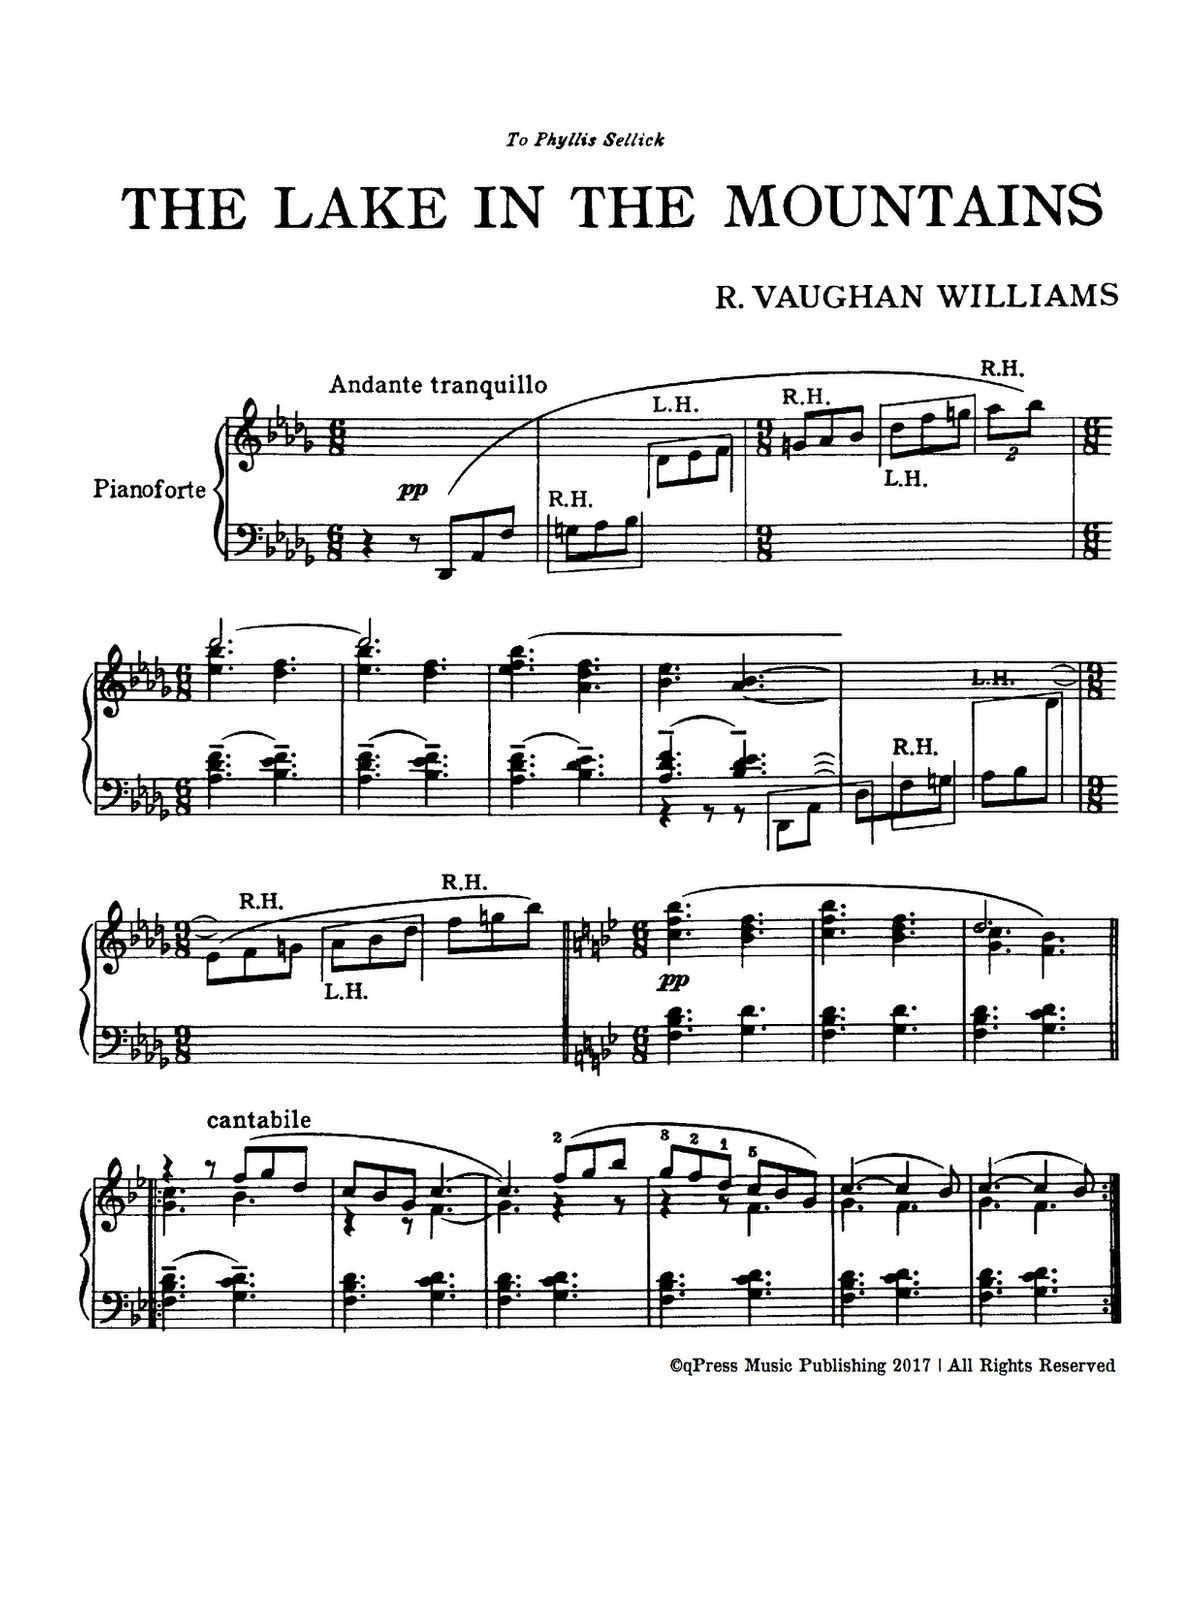 Vaughan Williams, The Lake in the Mountains-p2